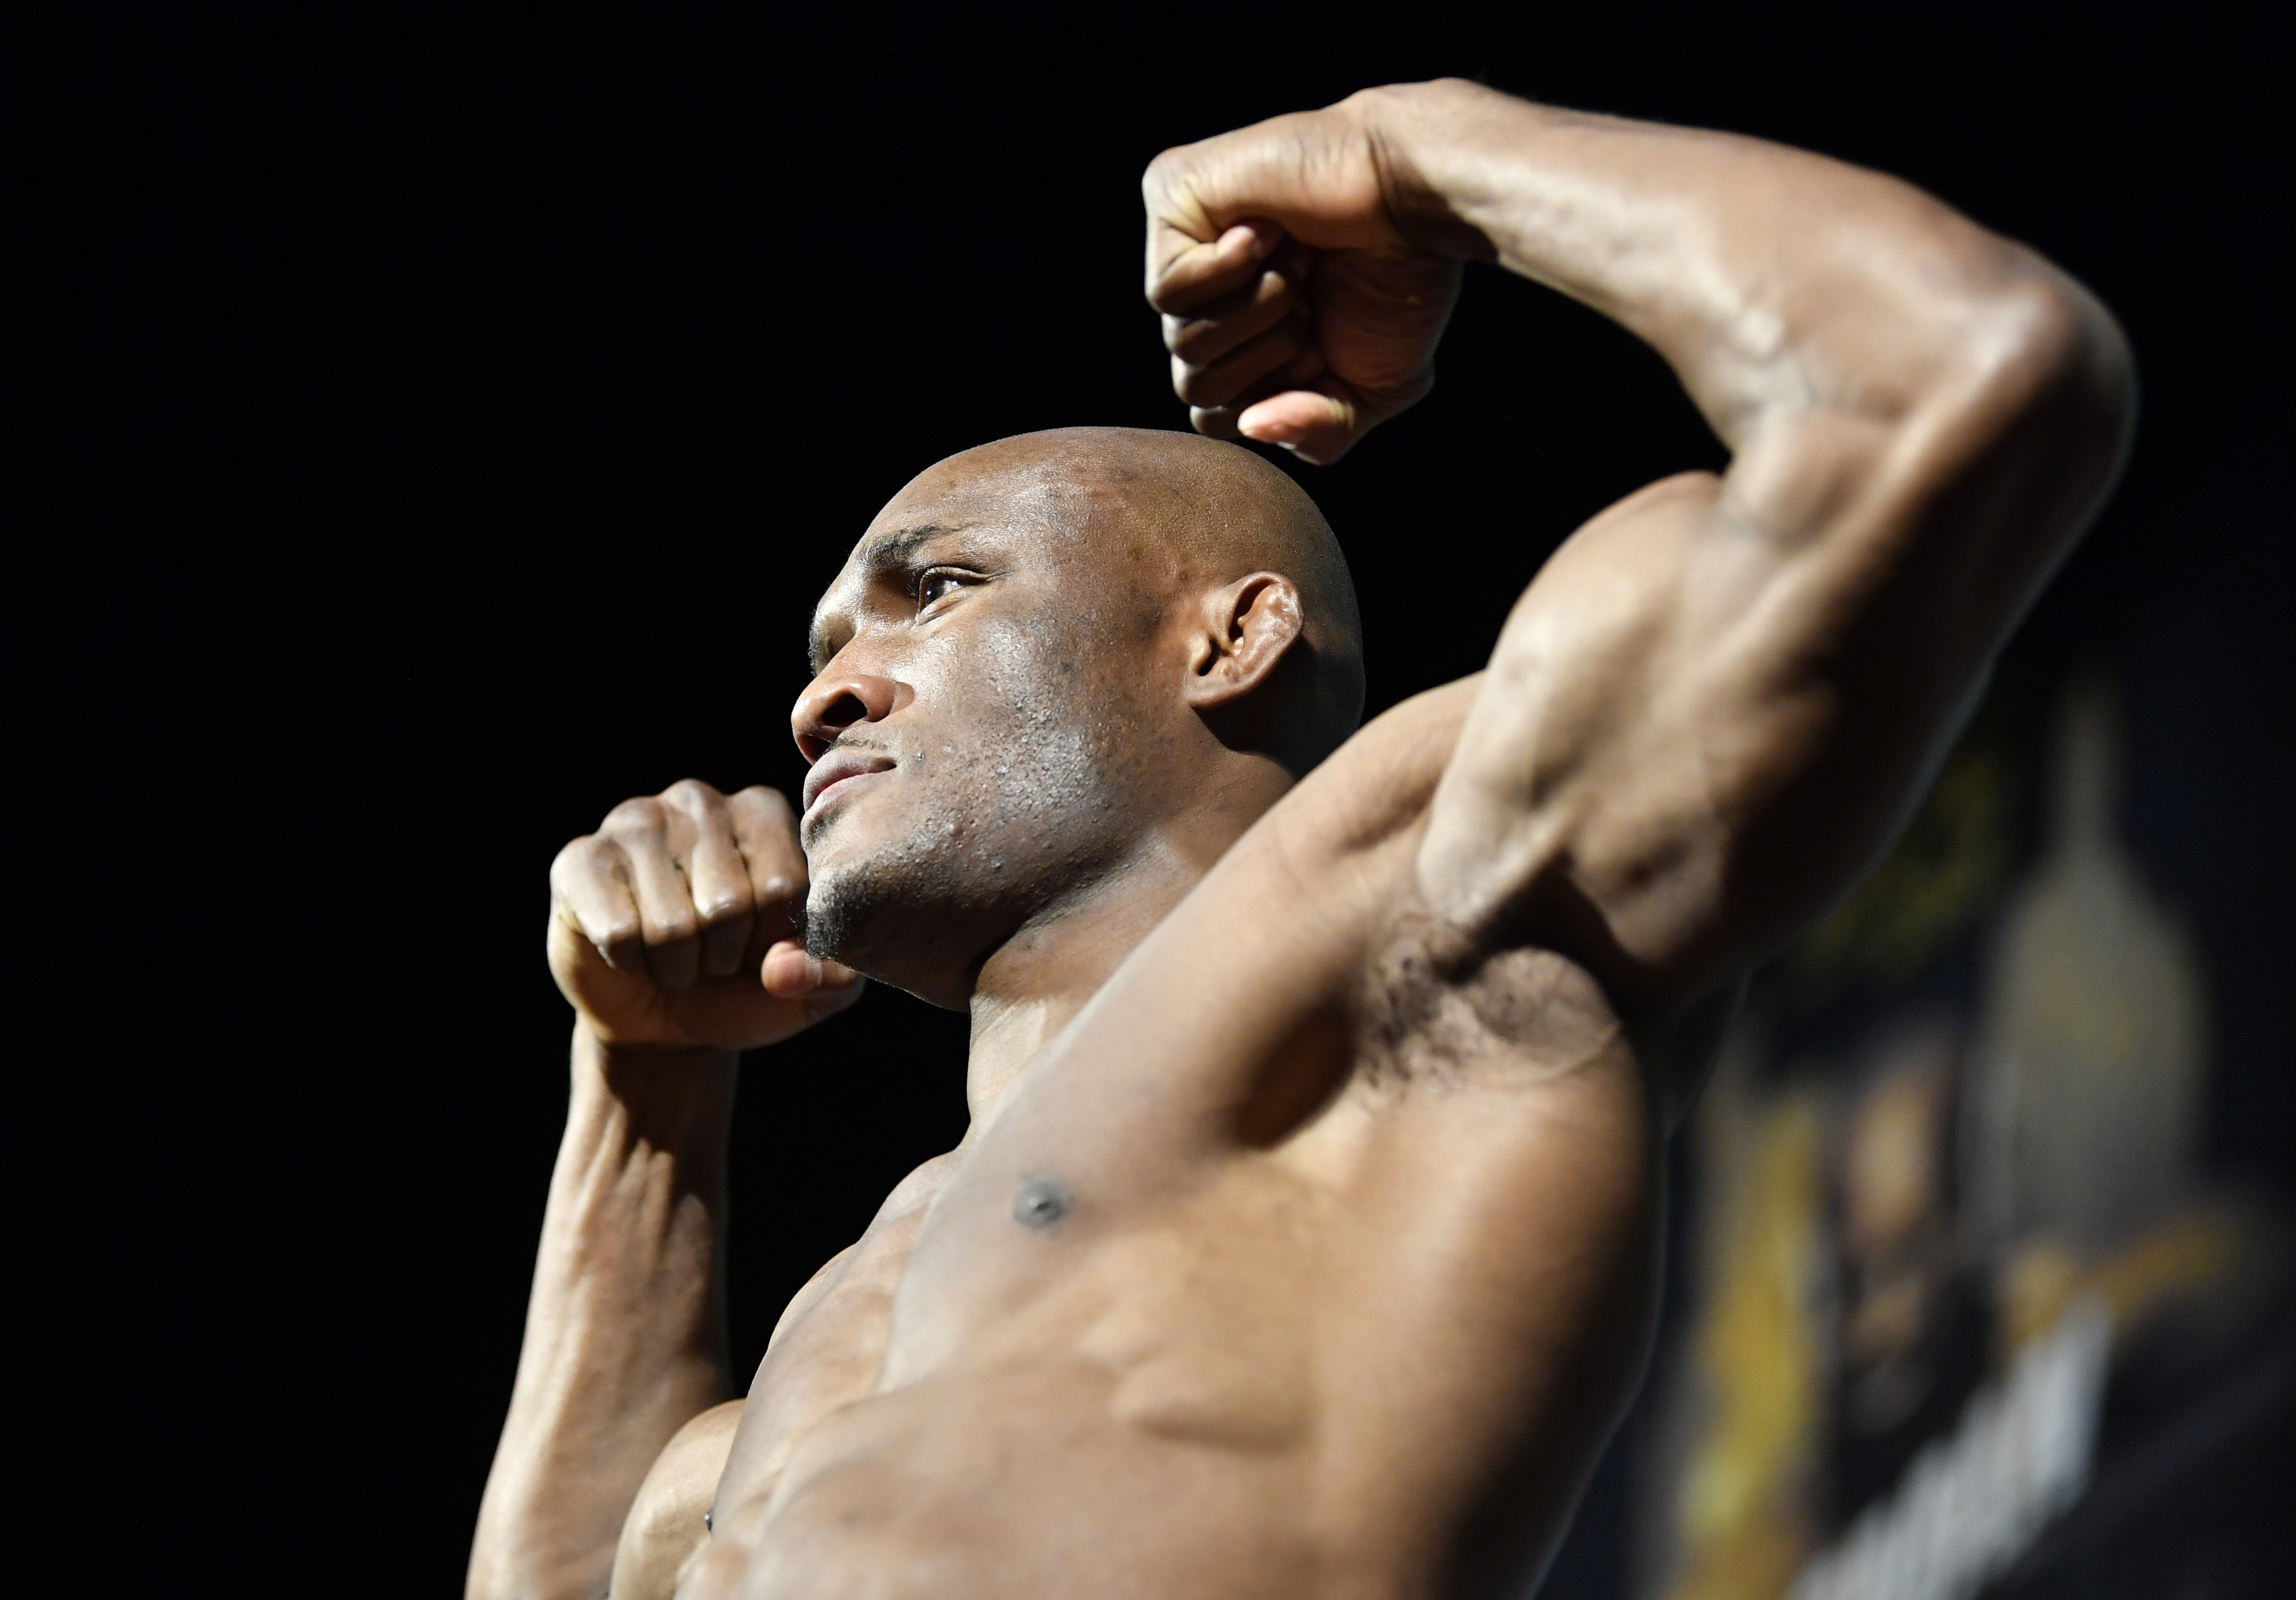 Kamaru Usman of Nigeria poses on the scale during the UFC 268 ceremonial weigh-in at The Hulu Theater at Madison Square Garden on November 05, 2021 in New York City.